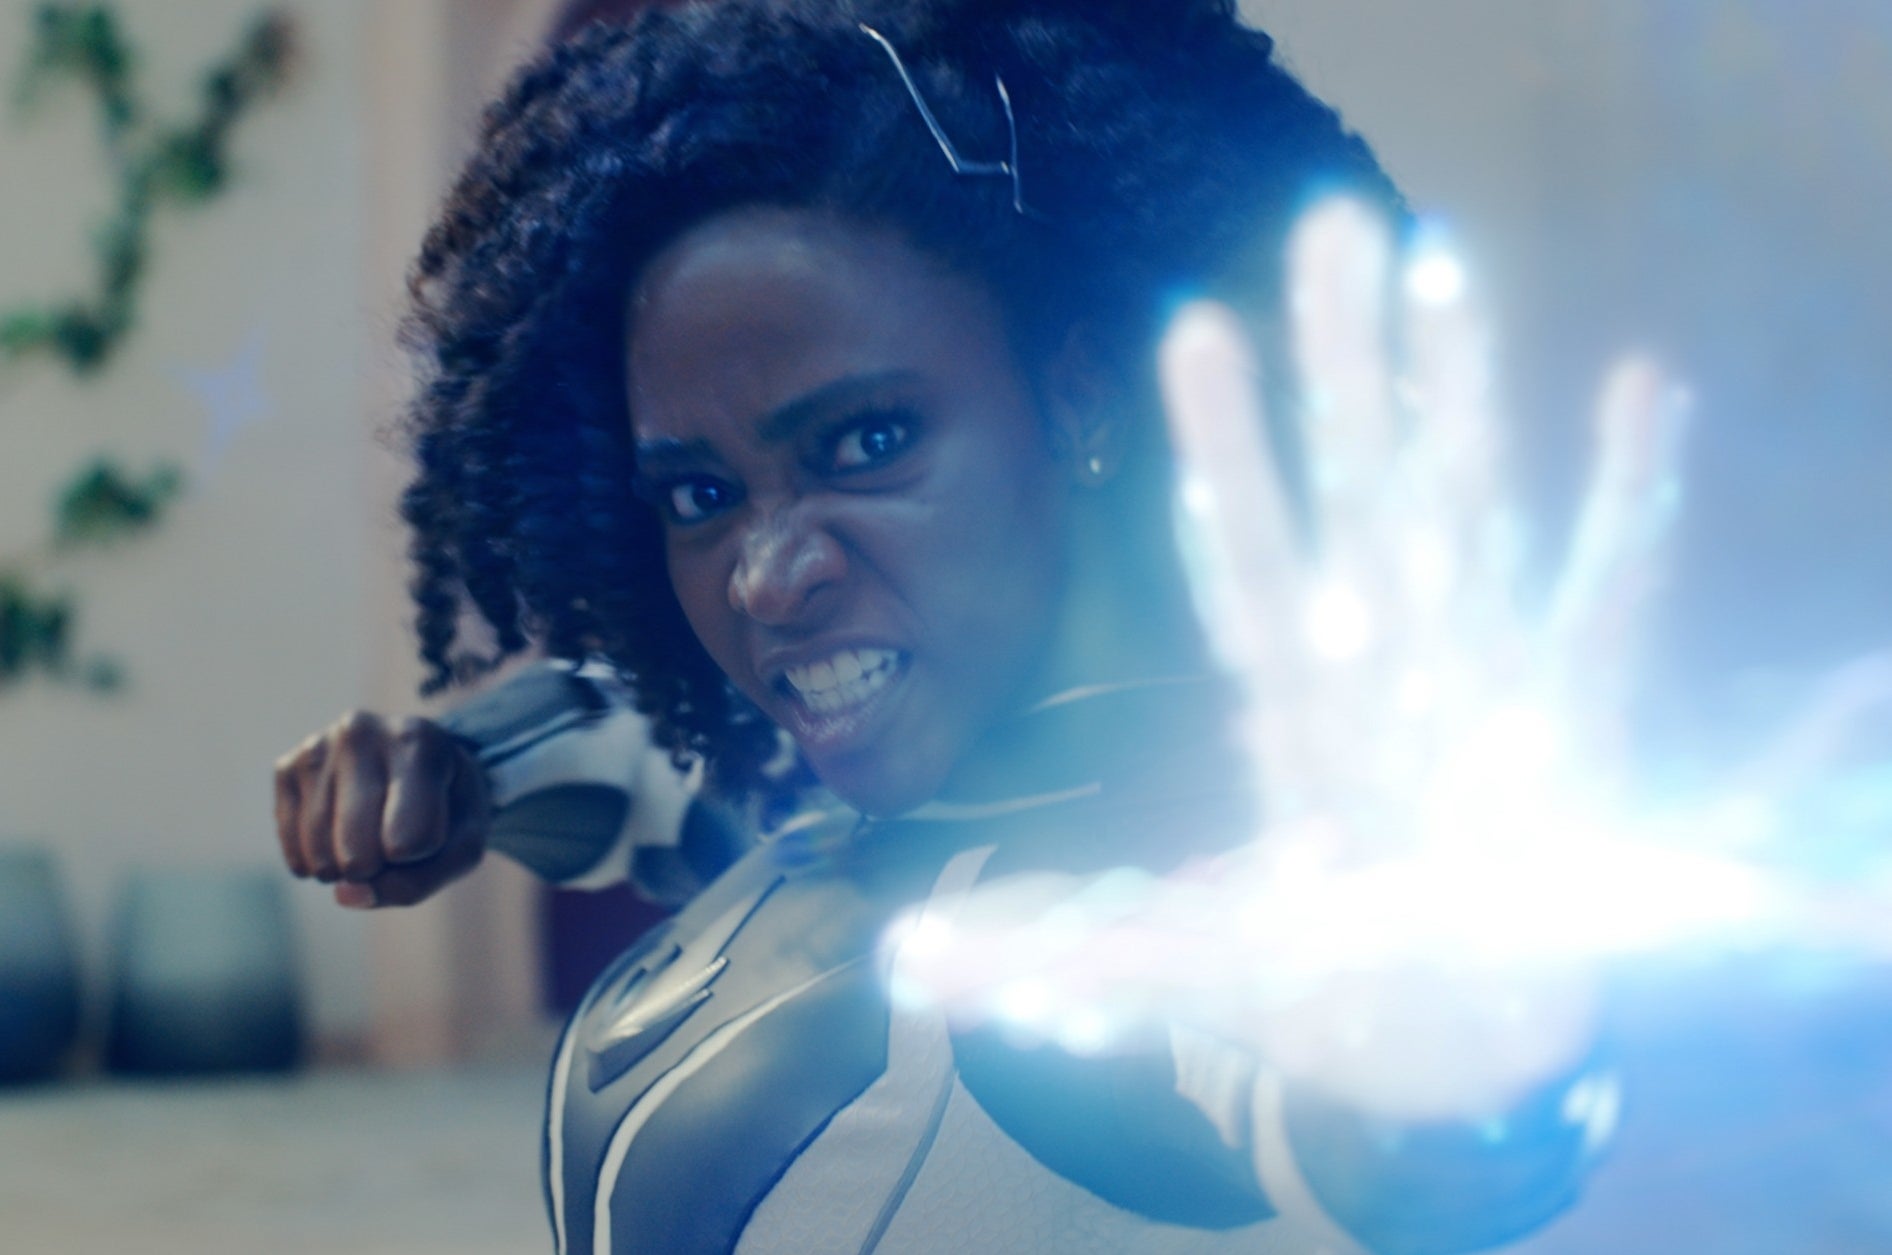 Monica in a superhero costume with a focused expression using powers emitting blue light from hand